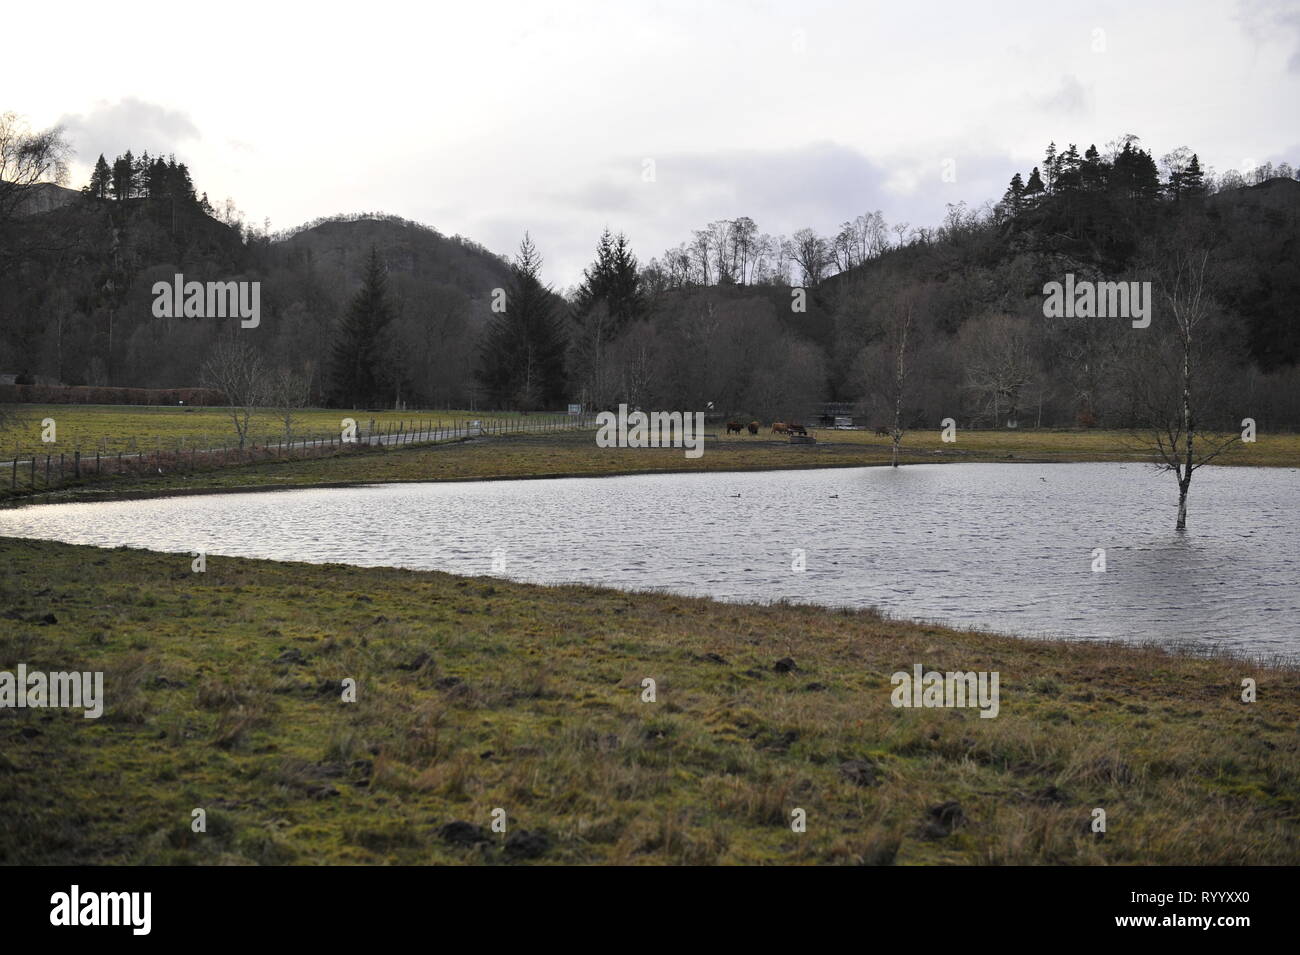 The Trossachs, UK. 15 March 2019. Aftermath of Storm Hannah - Scenes from Loch Achray in the Trossachs near the town of Callander.  Fields, Fences and Trees either under water, or partly submerged.  The muddy ground is saturated with water. The water level of the loch is almost up to the road side on the lower ground. The river which flows out of the loch has also burst its banks and flooded part of the town of Callander a few miles away. Credit: Colin Fisher/Alamy Live News Stock Photo